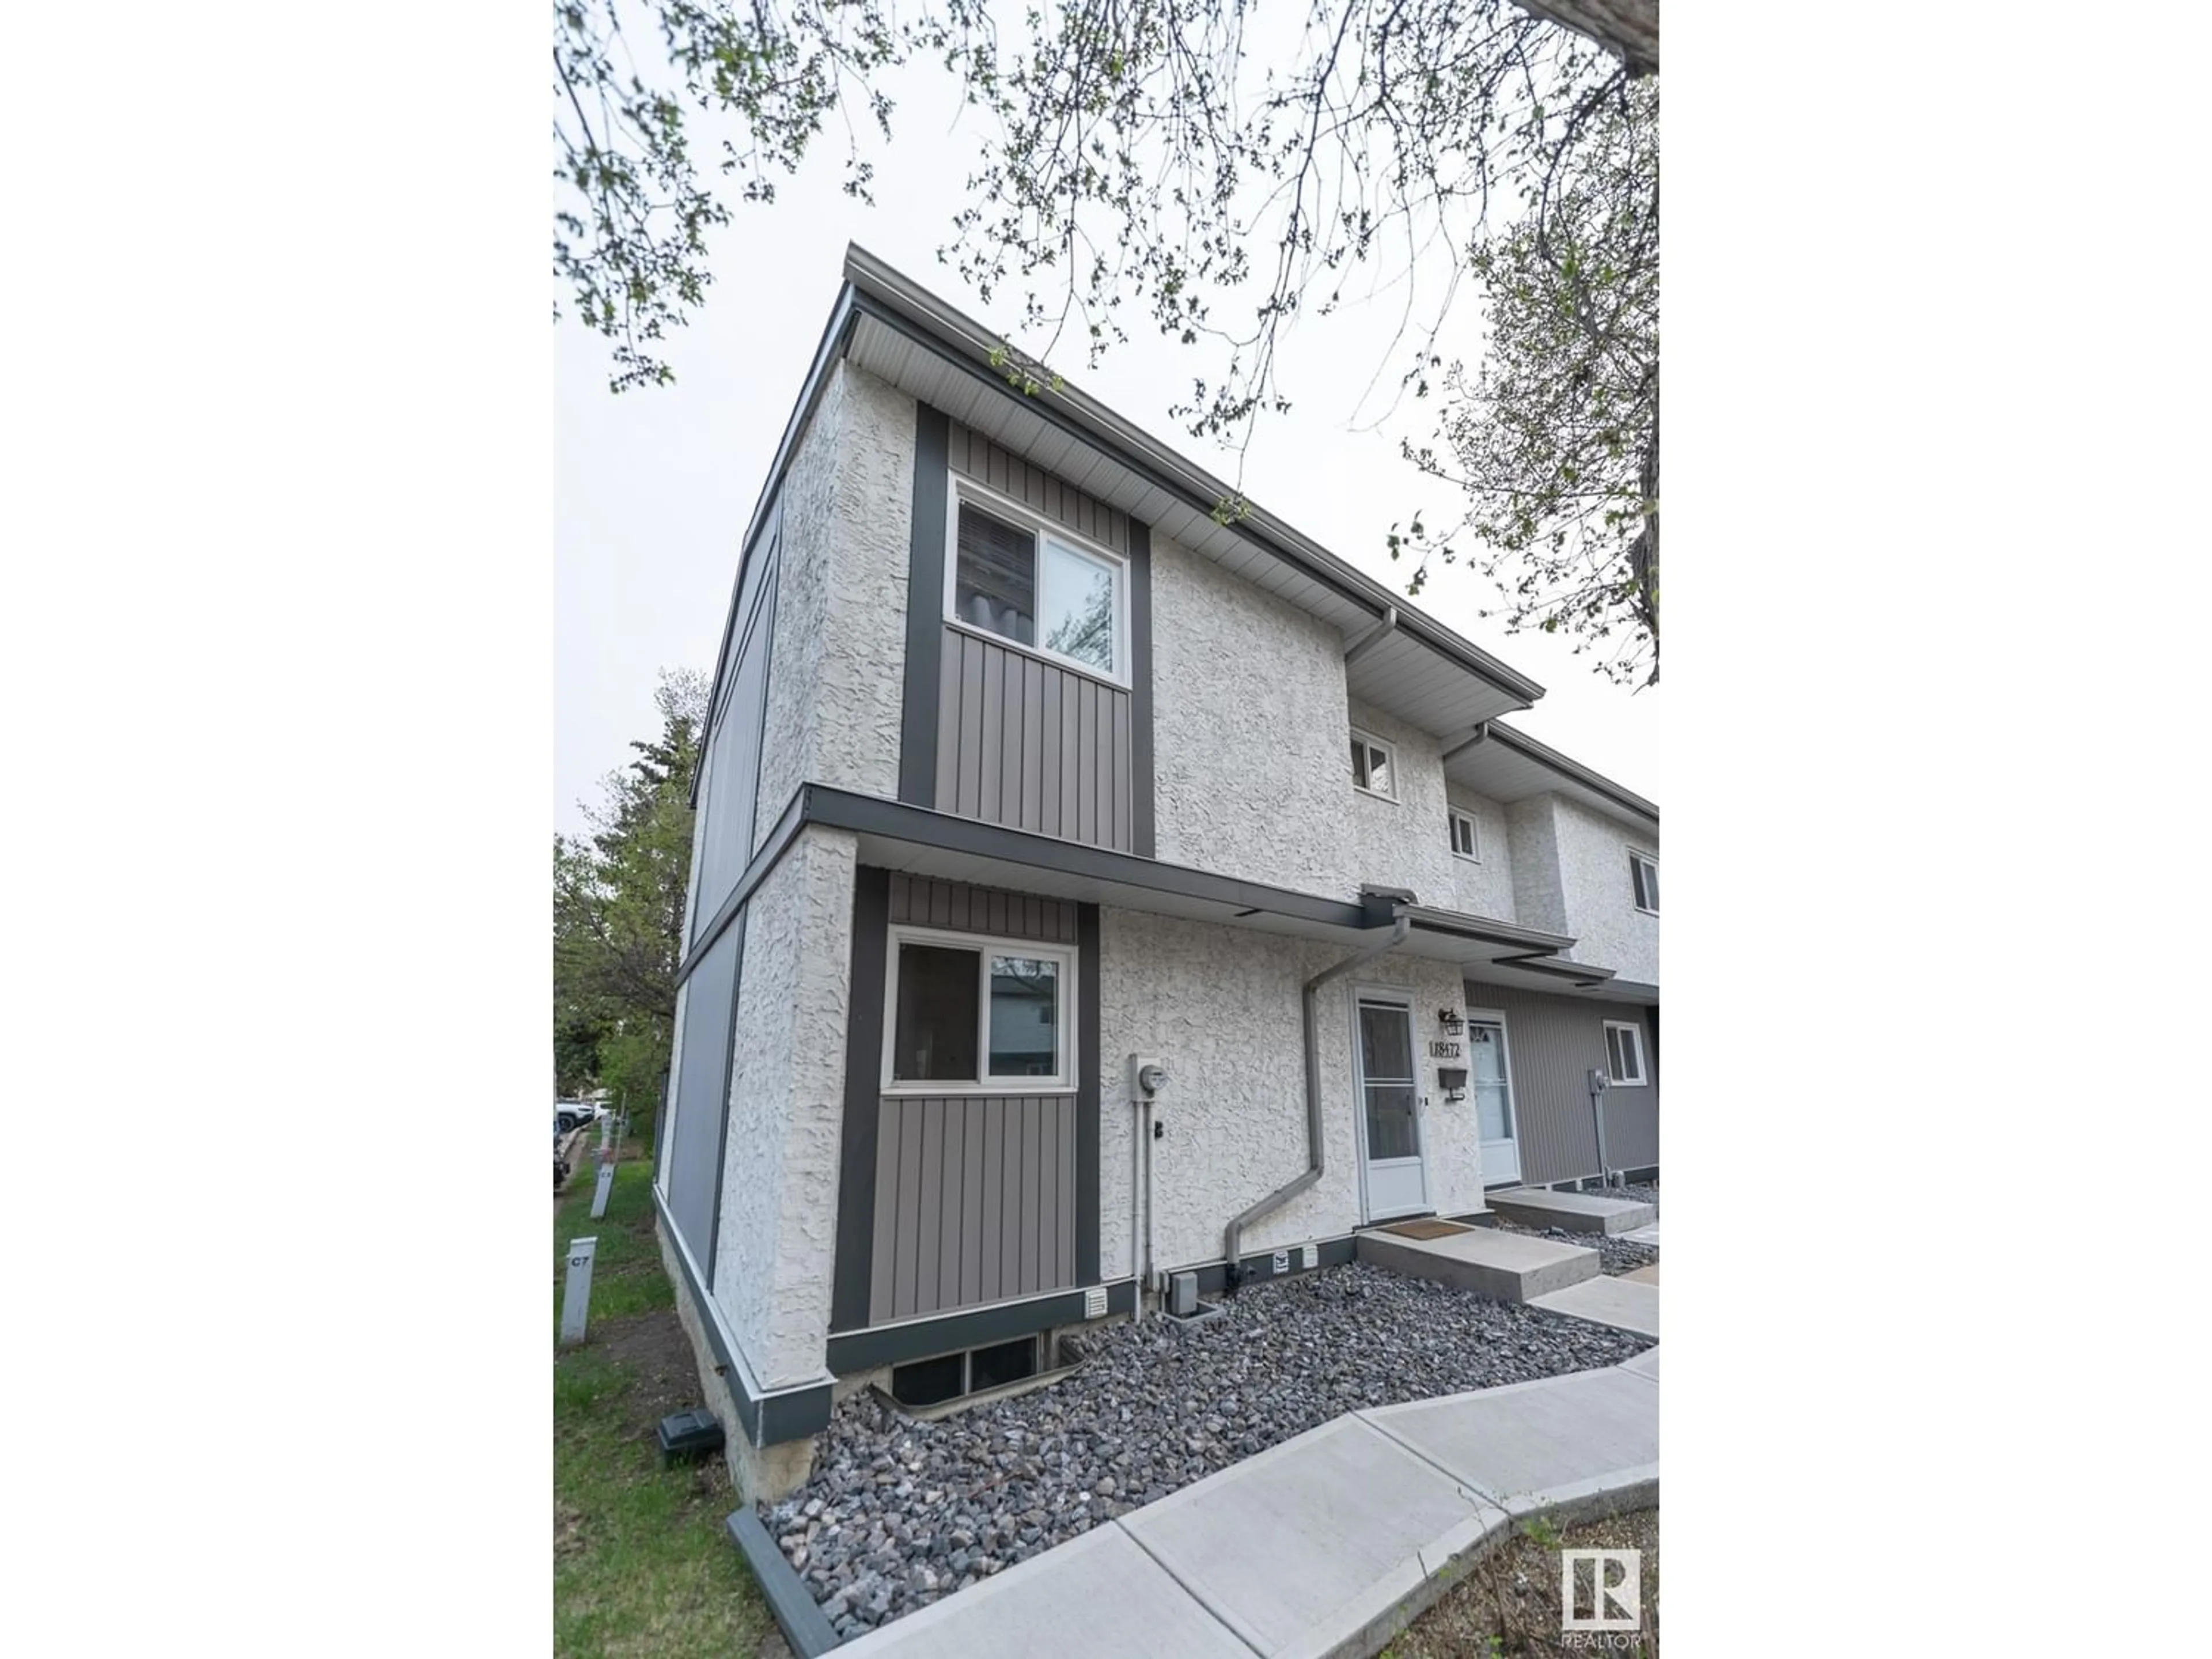 A pic from exterior of the house or condo for 18472 62B AV NW, Edmonton Alberta T5T2N7